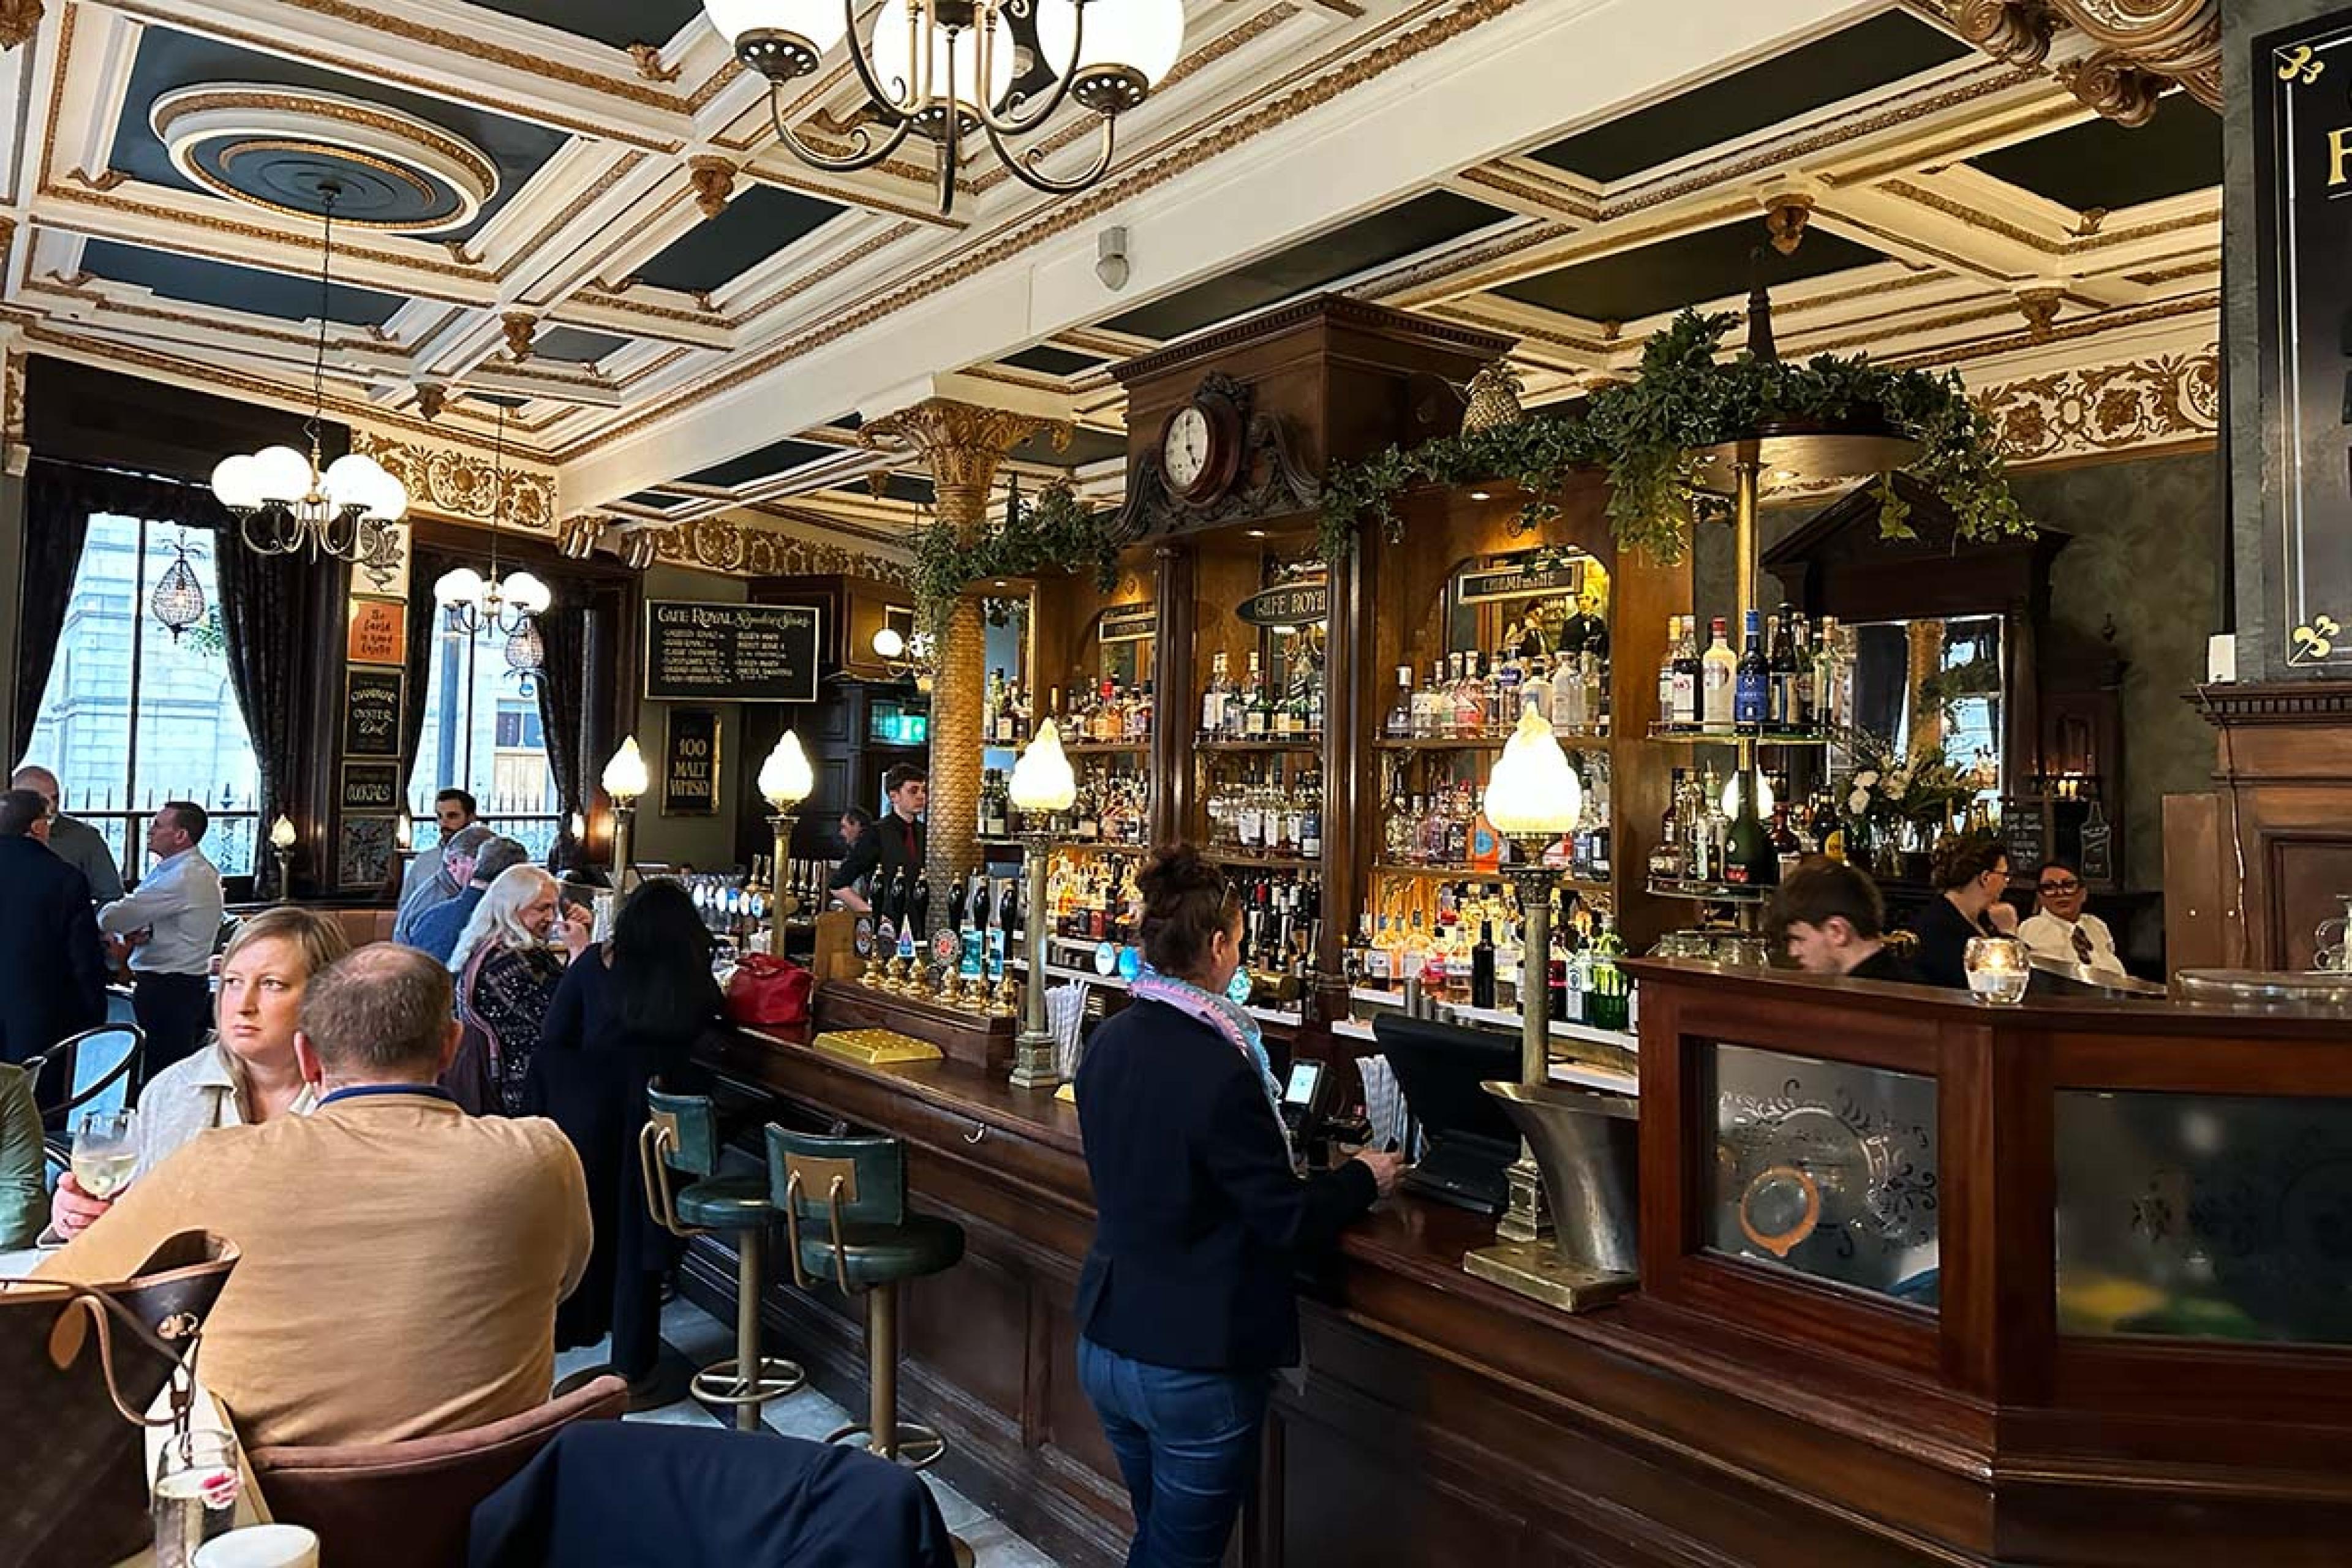 bar and restaurant with a polished wooden bar and an ornate ceiling